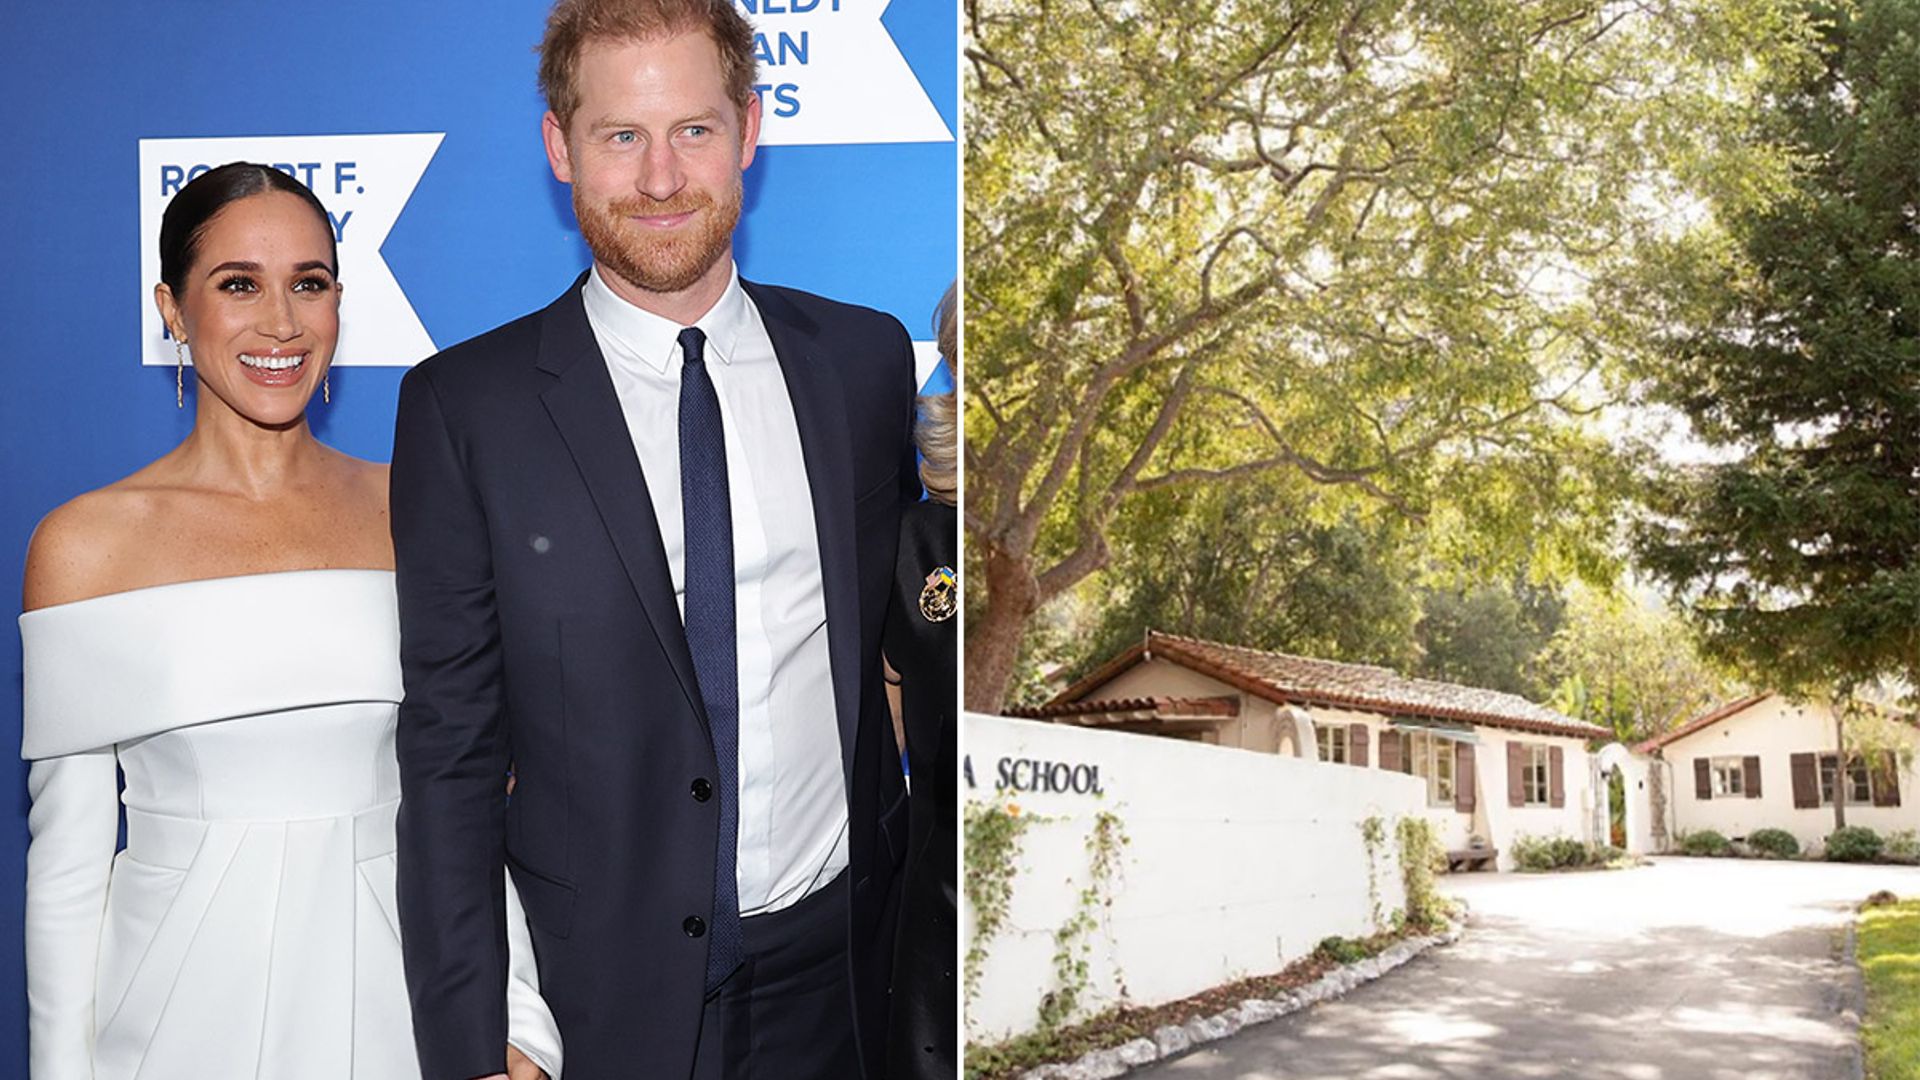 Harry and Meghan's school choices for Archie and Lilibet revealed by Montecito resident